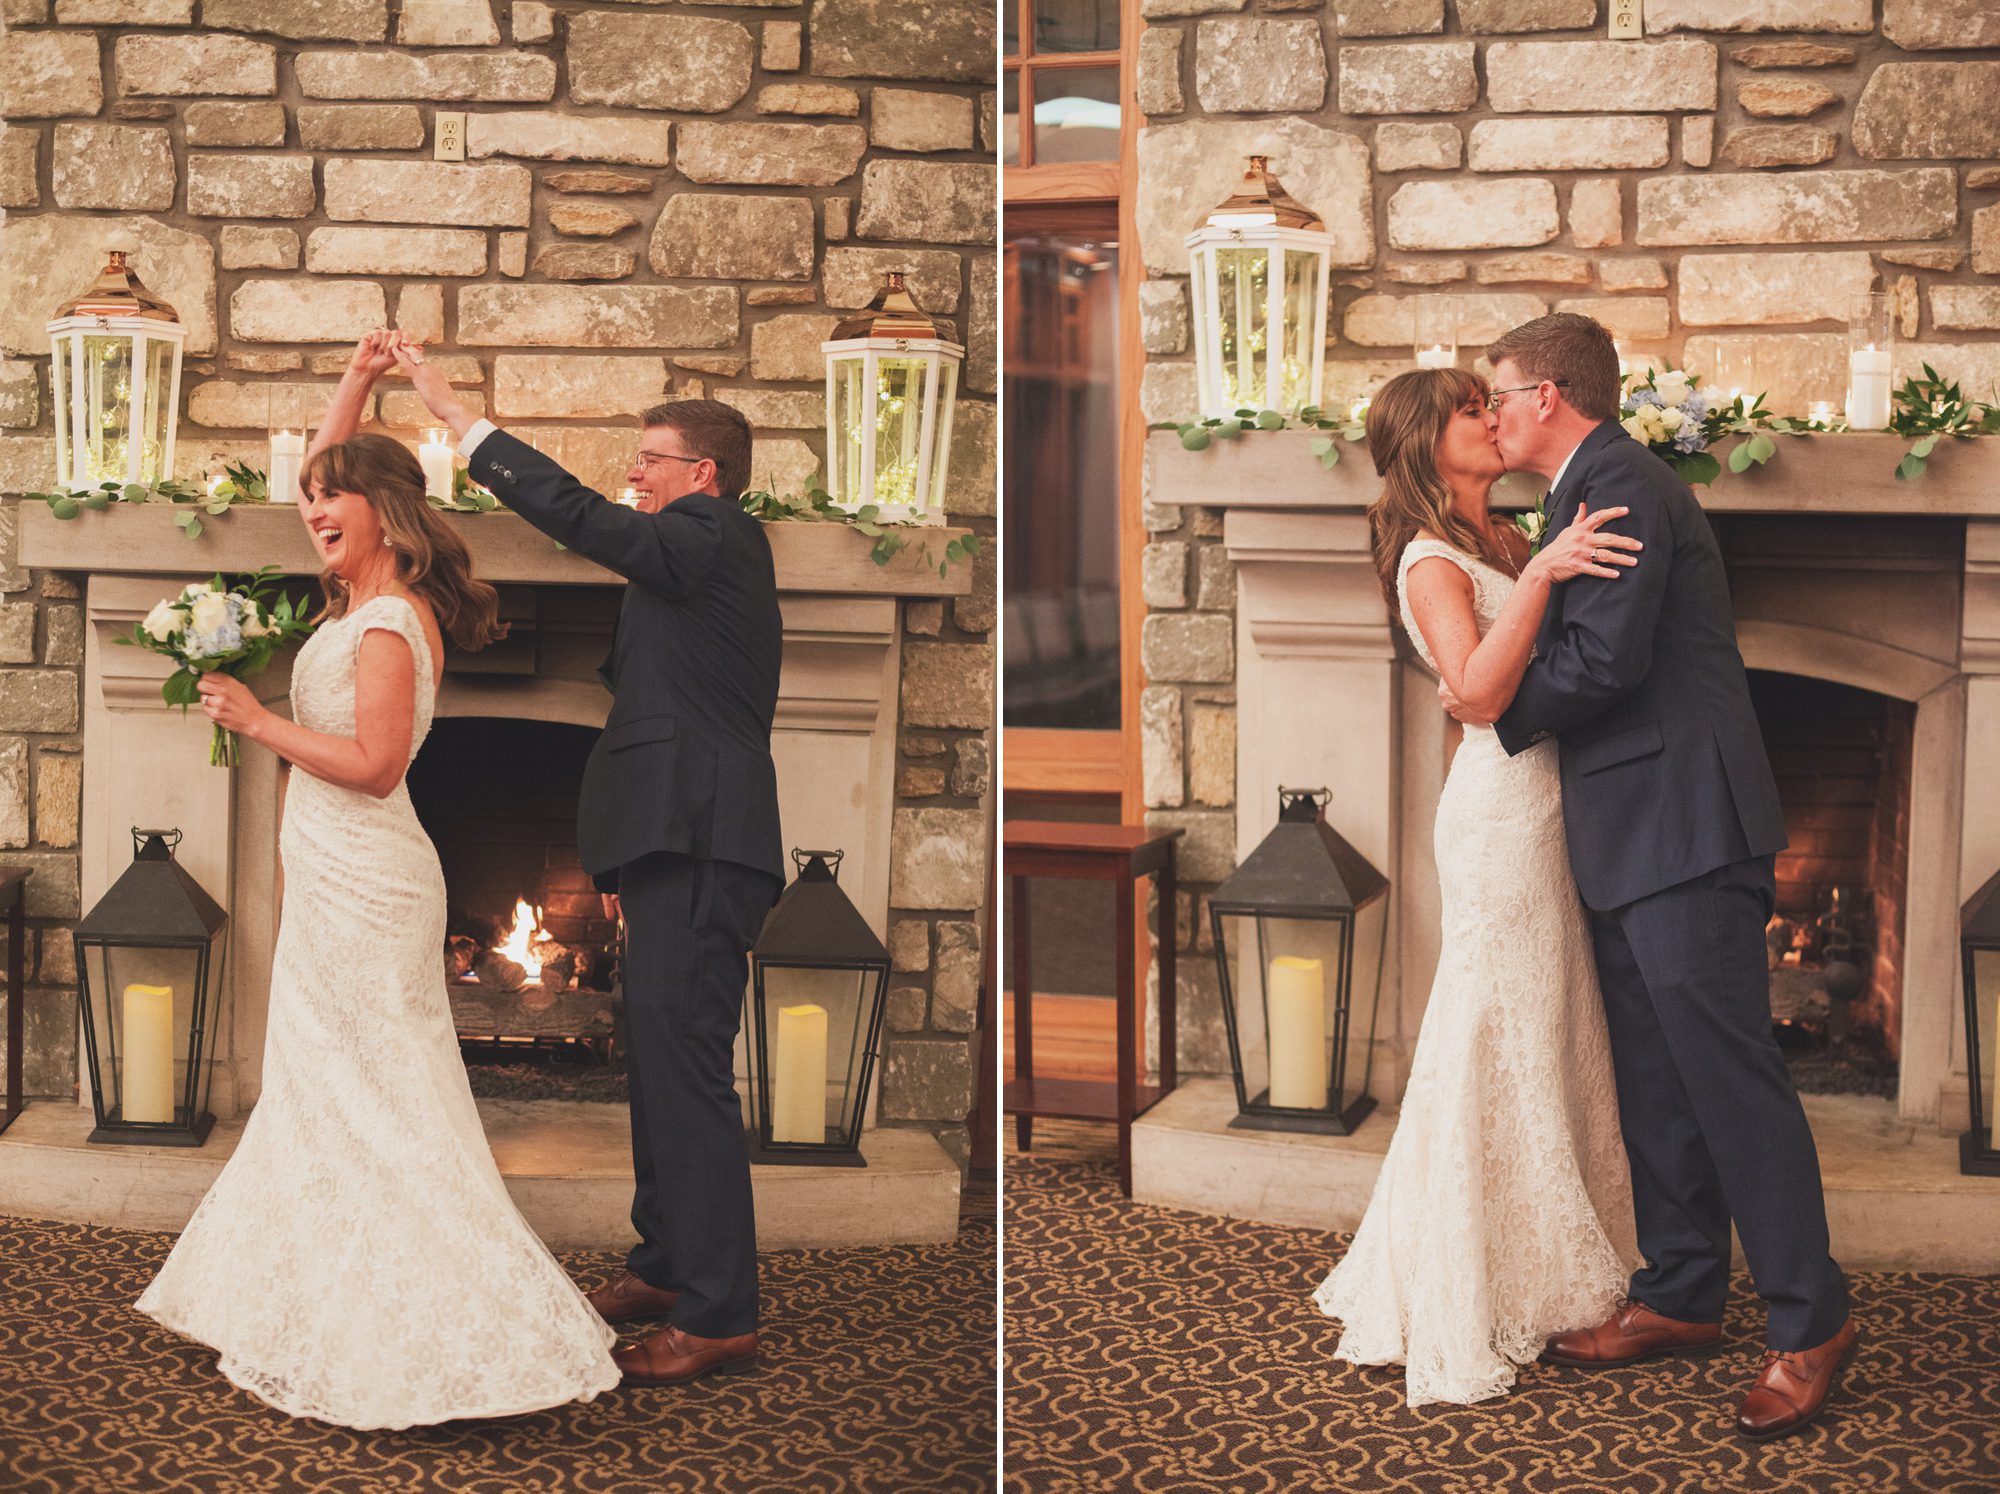 Groom spins bride in front of fireplace and mantle in clubhouse. Winter wedding at Vanderbilt Legends Golf Course in Brentwood TN, photos by Krista Lee Photography